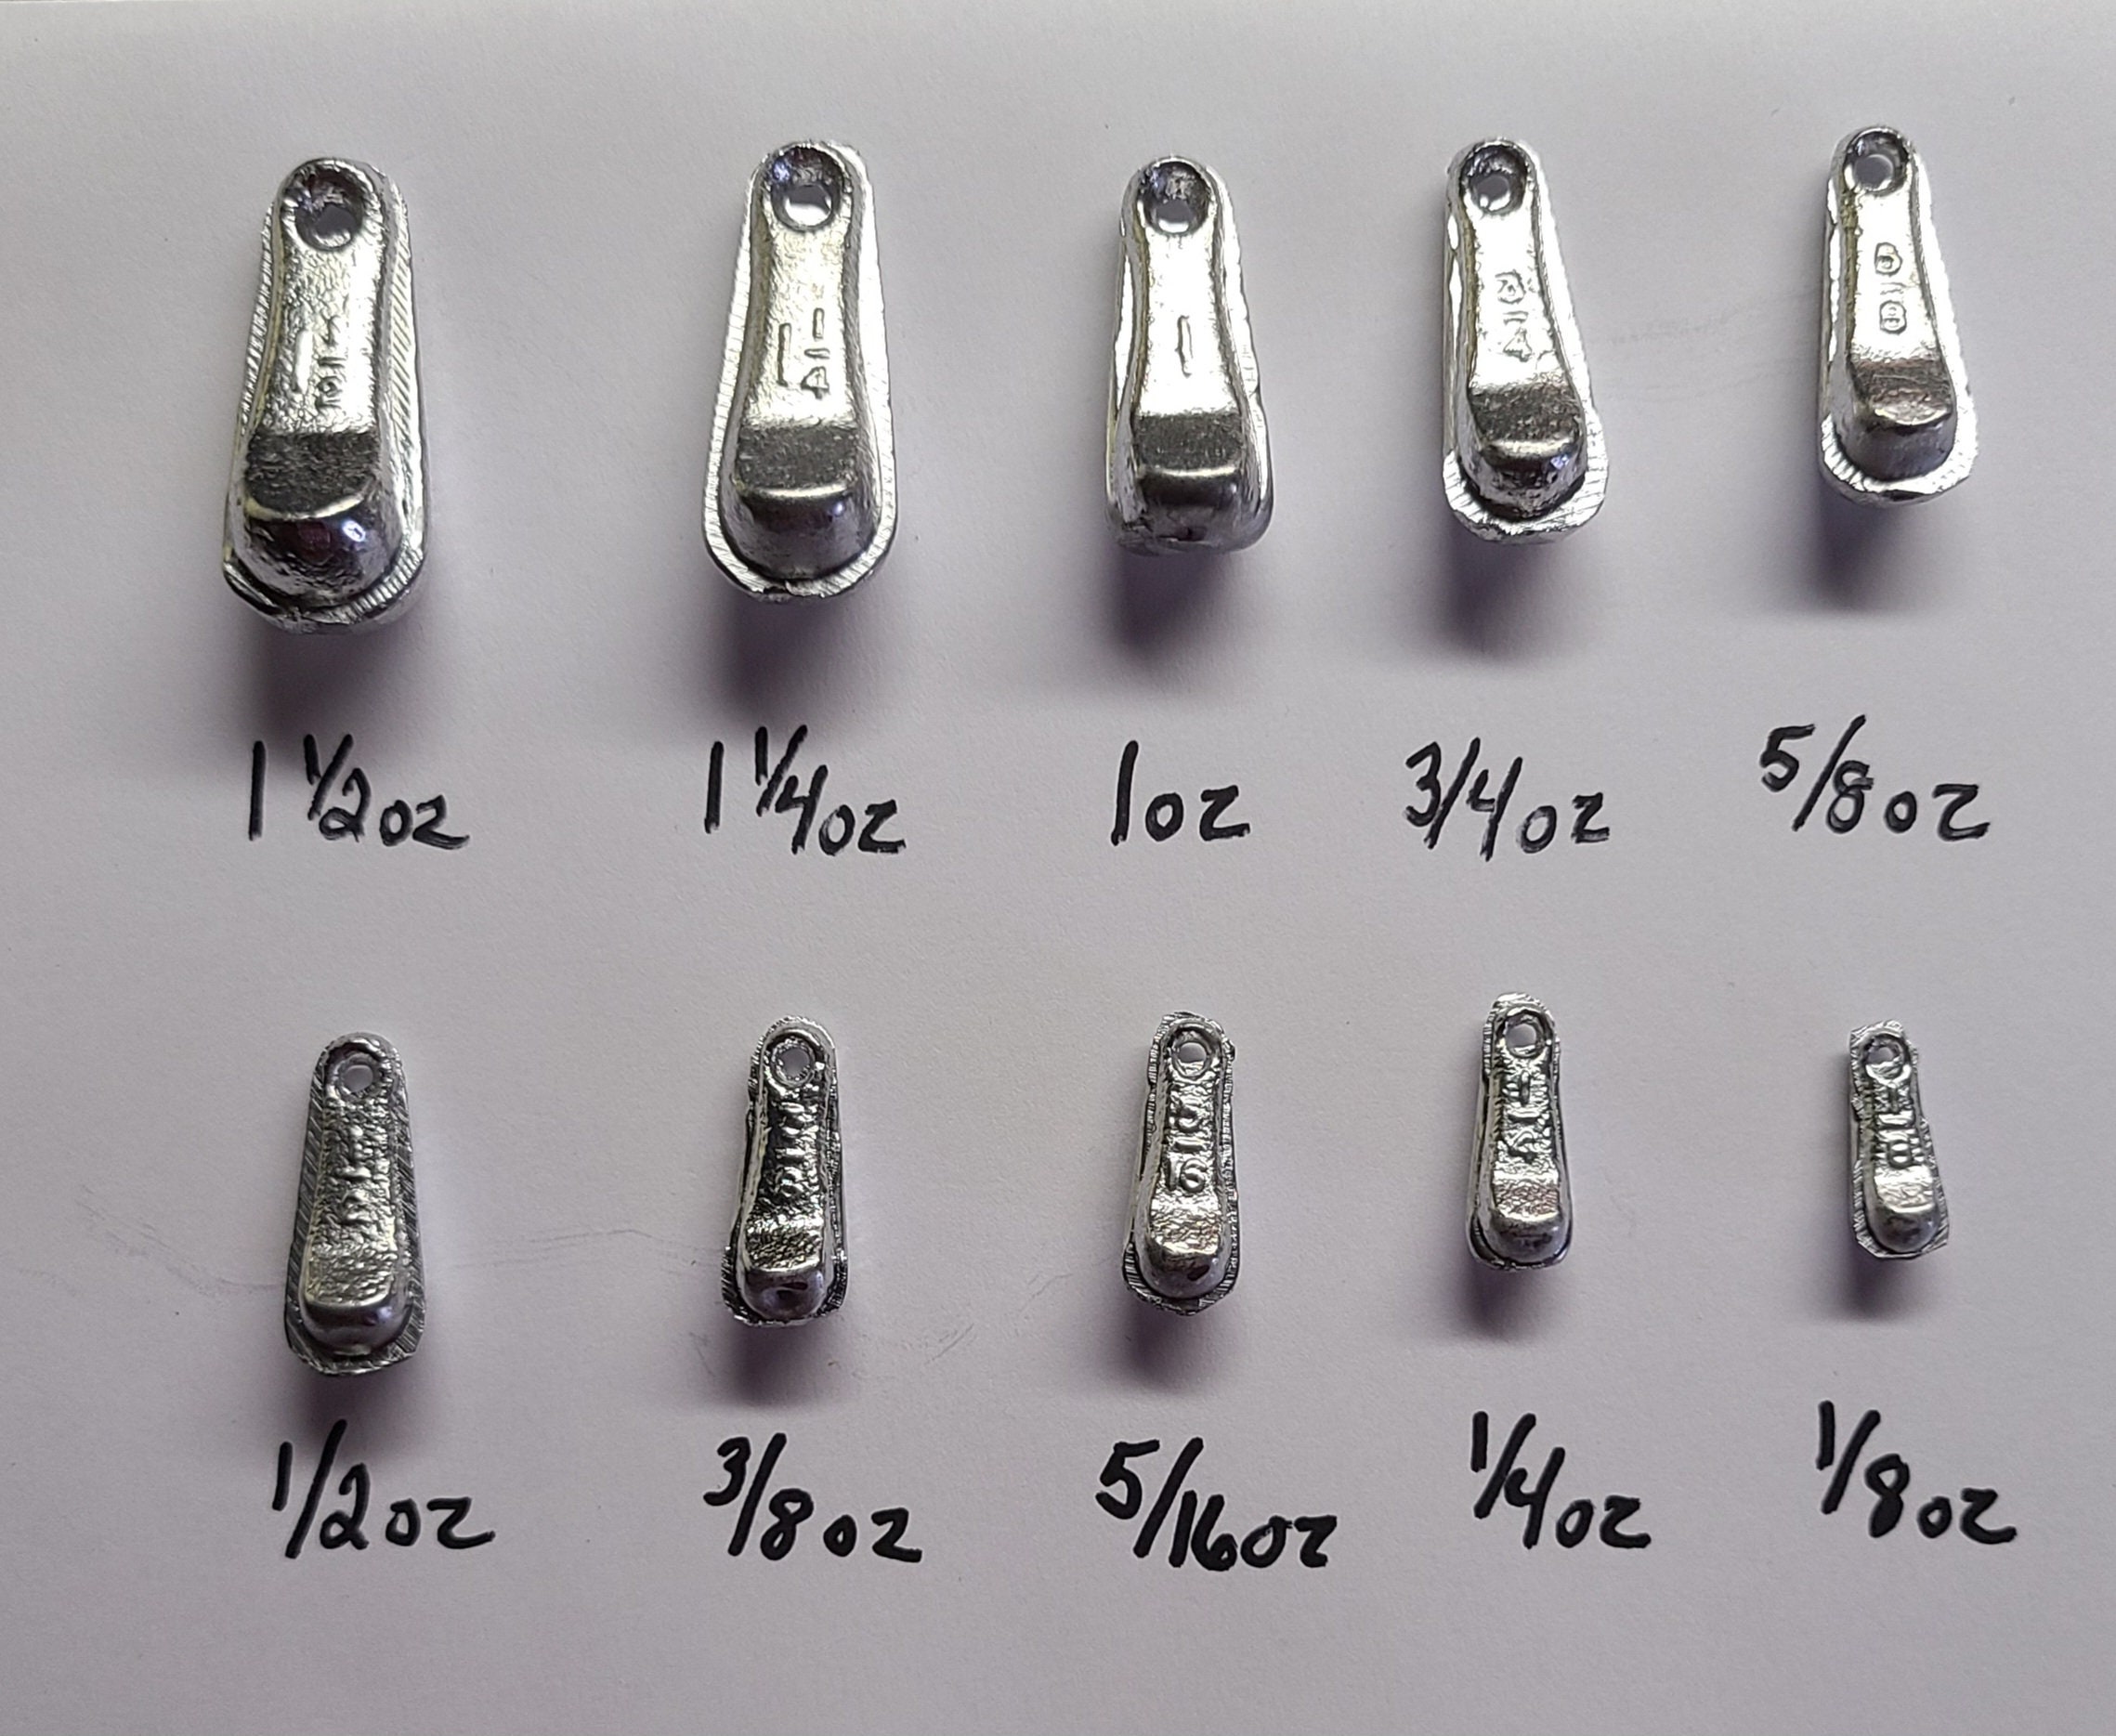 50 Lindy Sinkers, Walking Fishing Weights, ASSORTED Sizes FREE SHIPPING 